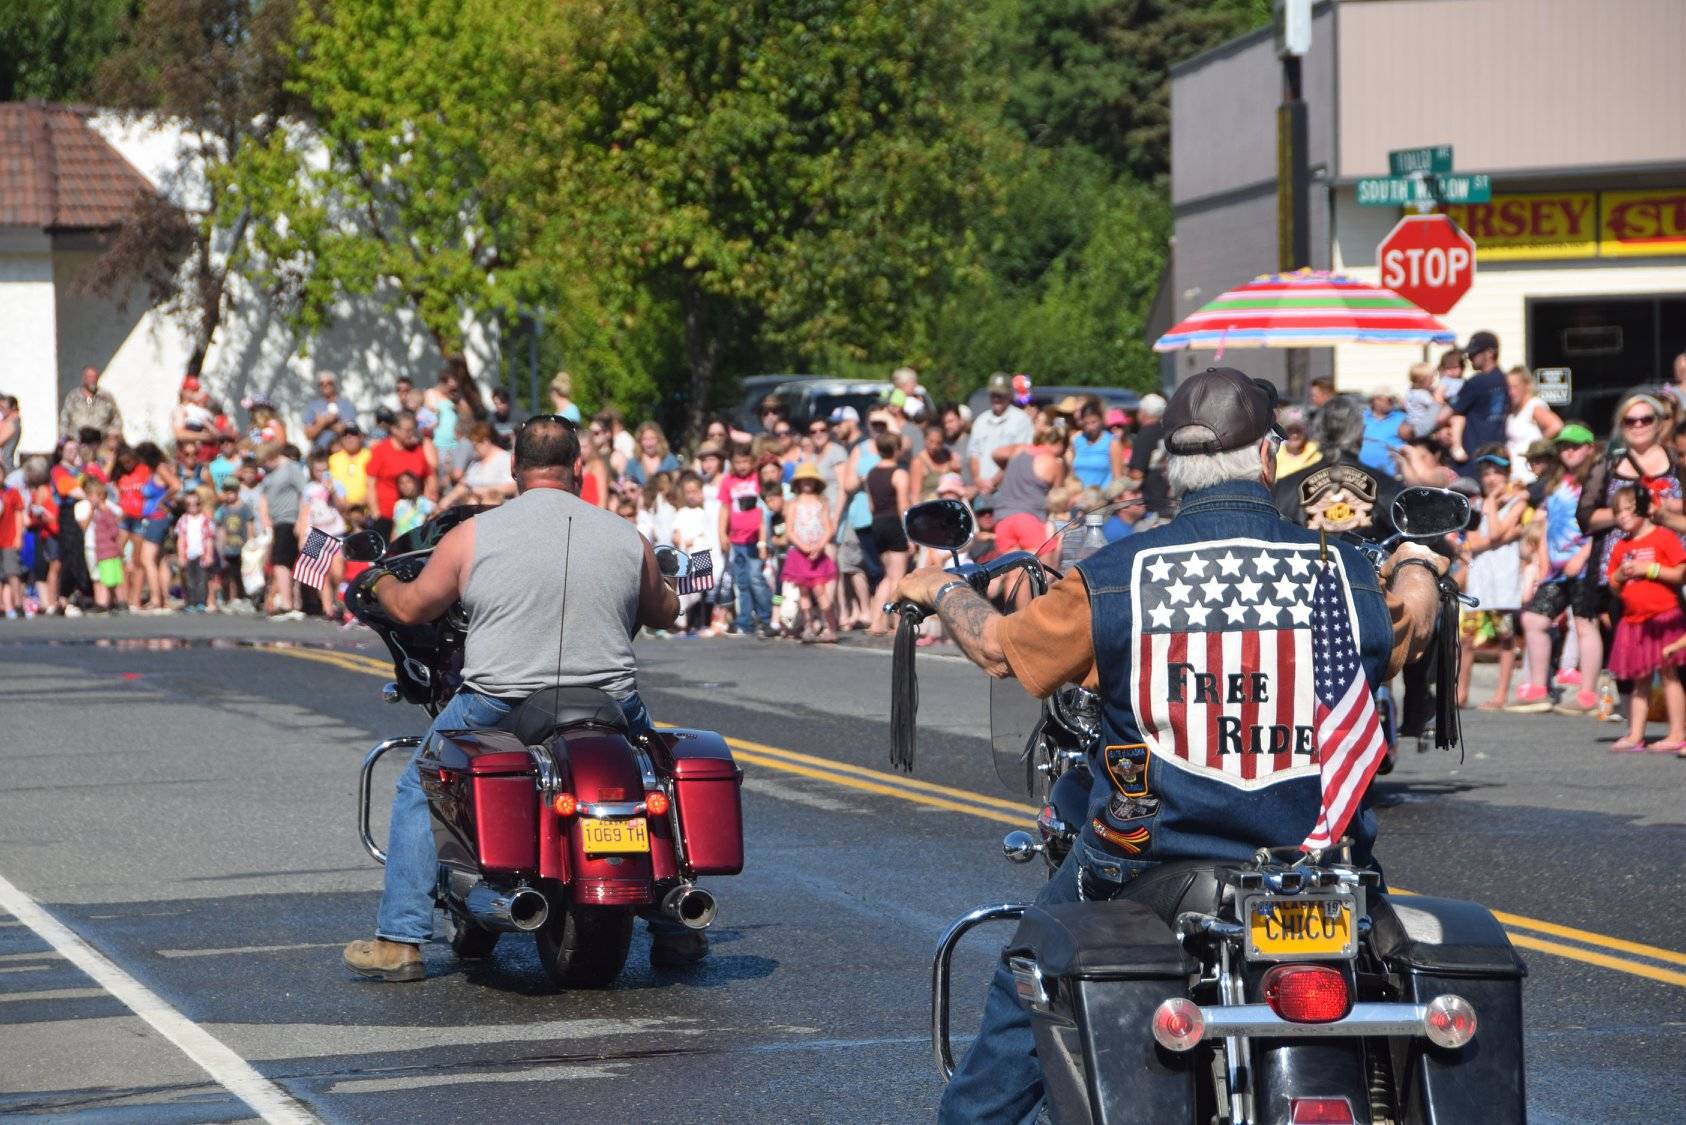 Bikers participate in the Fourth of July Parade in Kenai on July 4, 2019. Due to the COVID-19 pandemic, officially sanctioned events for July 4 — including the parades in Kenai, Seward and Homer and the Mount Marathon Race in Seward — have been canceled. (Photo by Brian Mazurek/Peninsula Clarion)